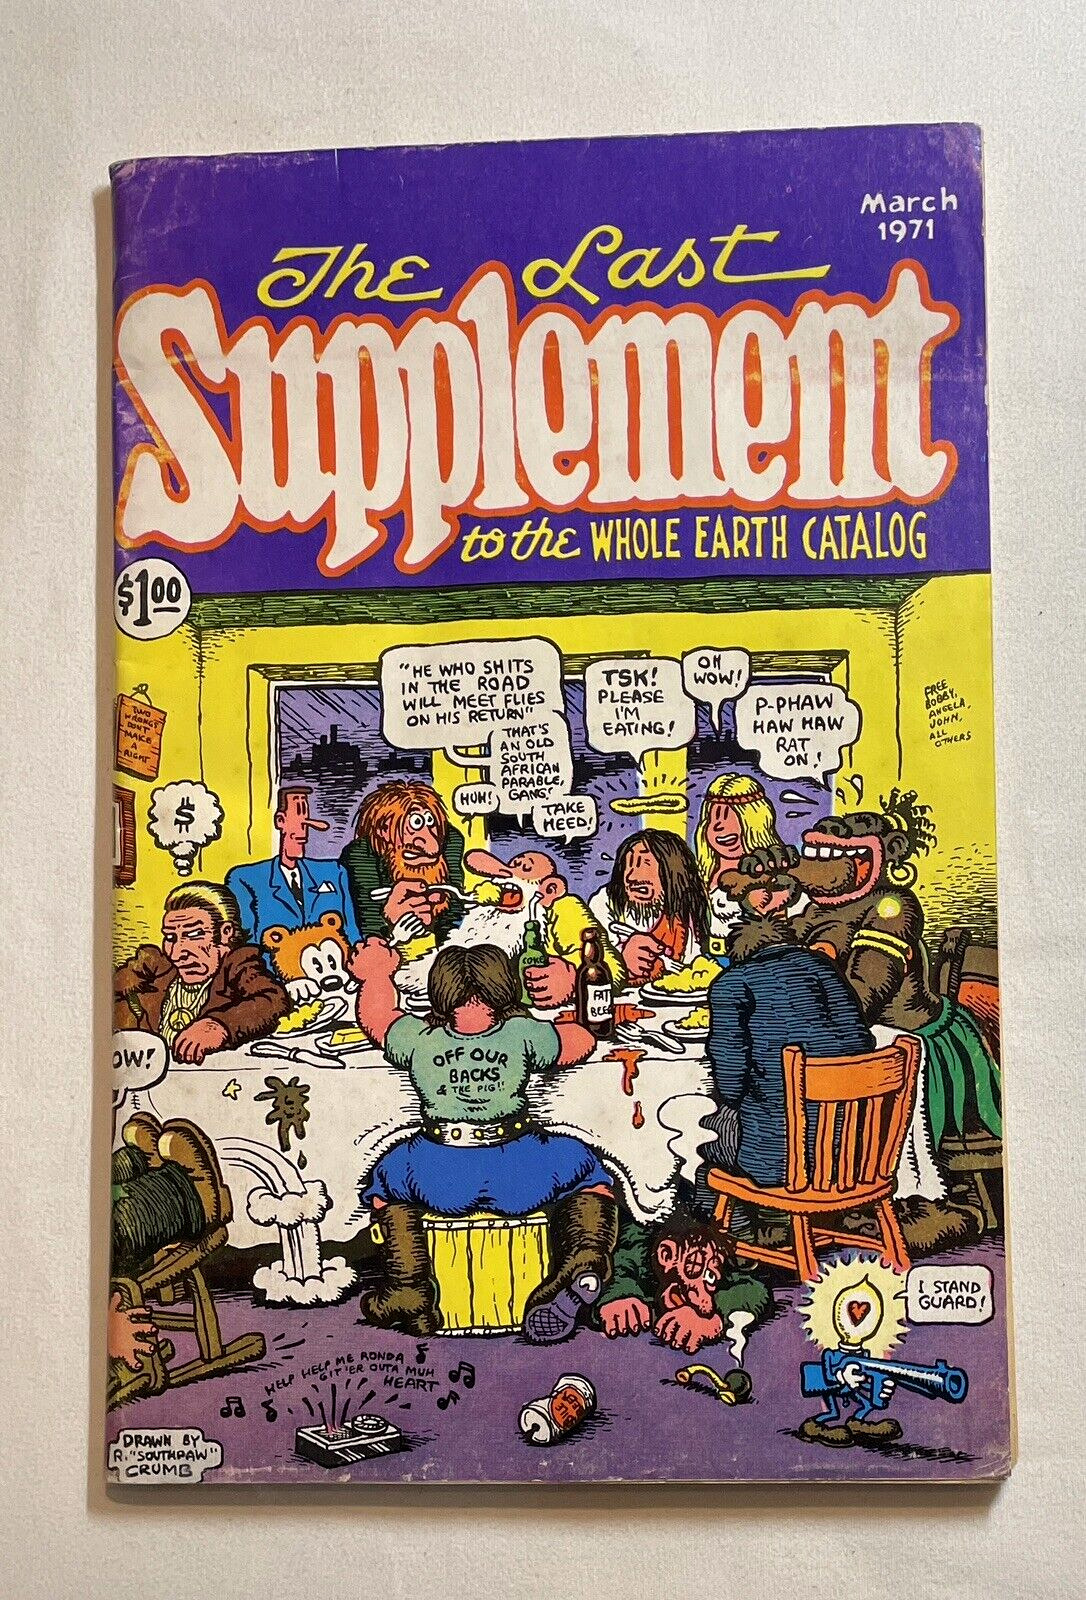 R. CRUMB - 1971 LAST SUPPLEMENT TO THE WHOLE EARTH CATALOG ~UNDERGROUND MAGAZINE